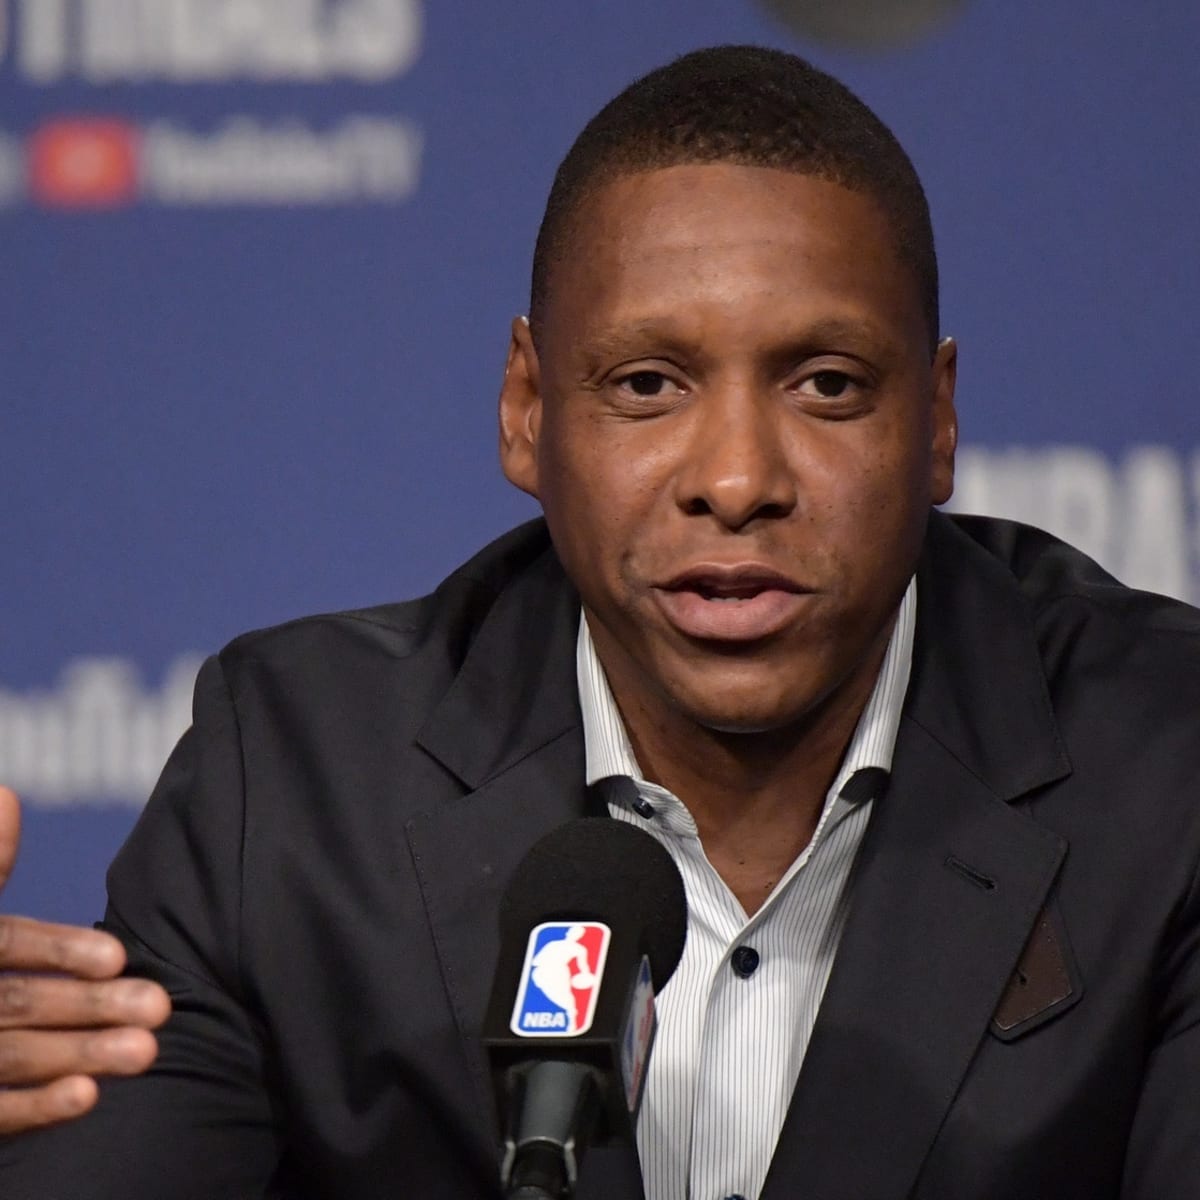 Masai Ujiri had to choose between loyalty to a player and a chance